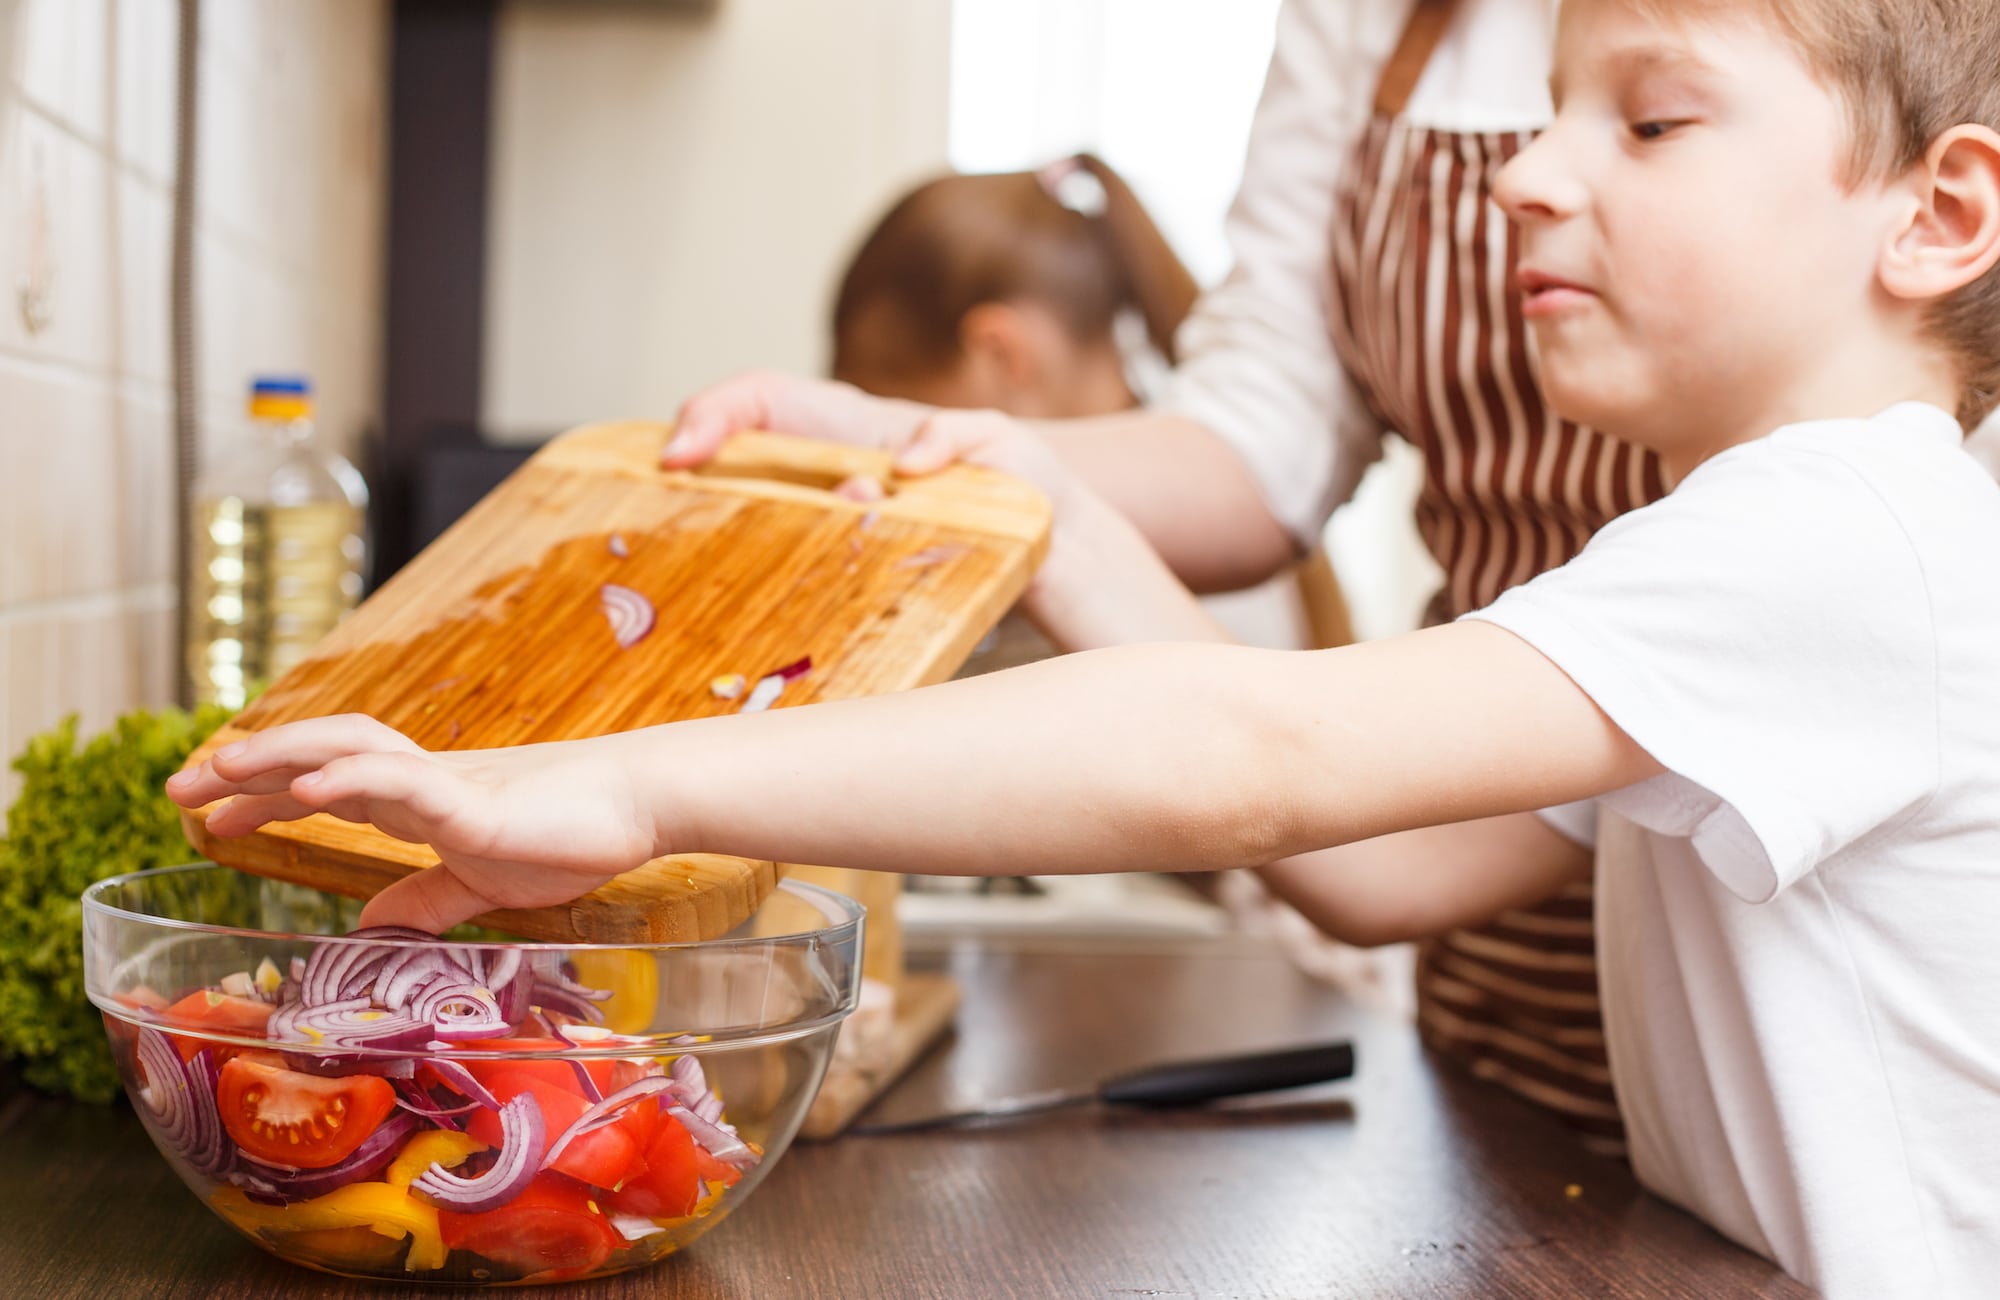 Cooking Activities for Preschoolers + 5 Kid-Approved Recipes